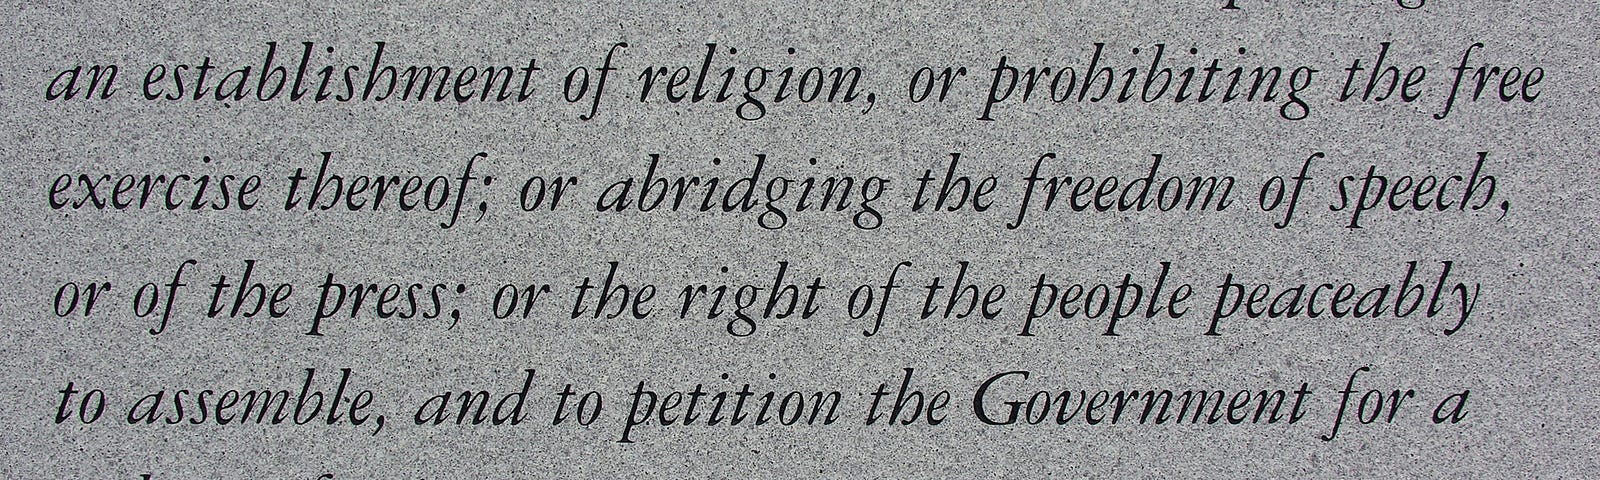 A photograph of a stone plaque engraved with the First Amendment to the United States Constitution